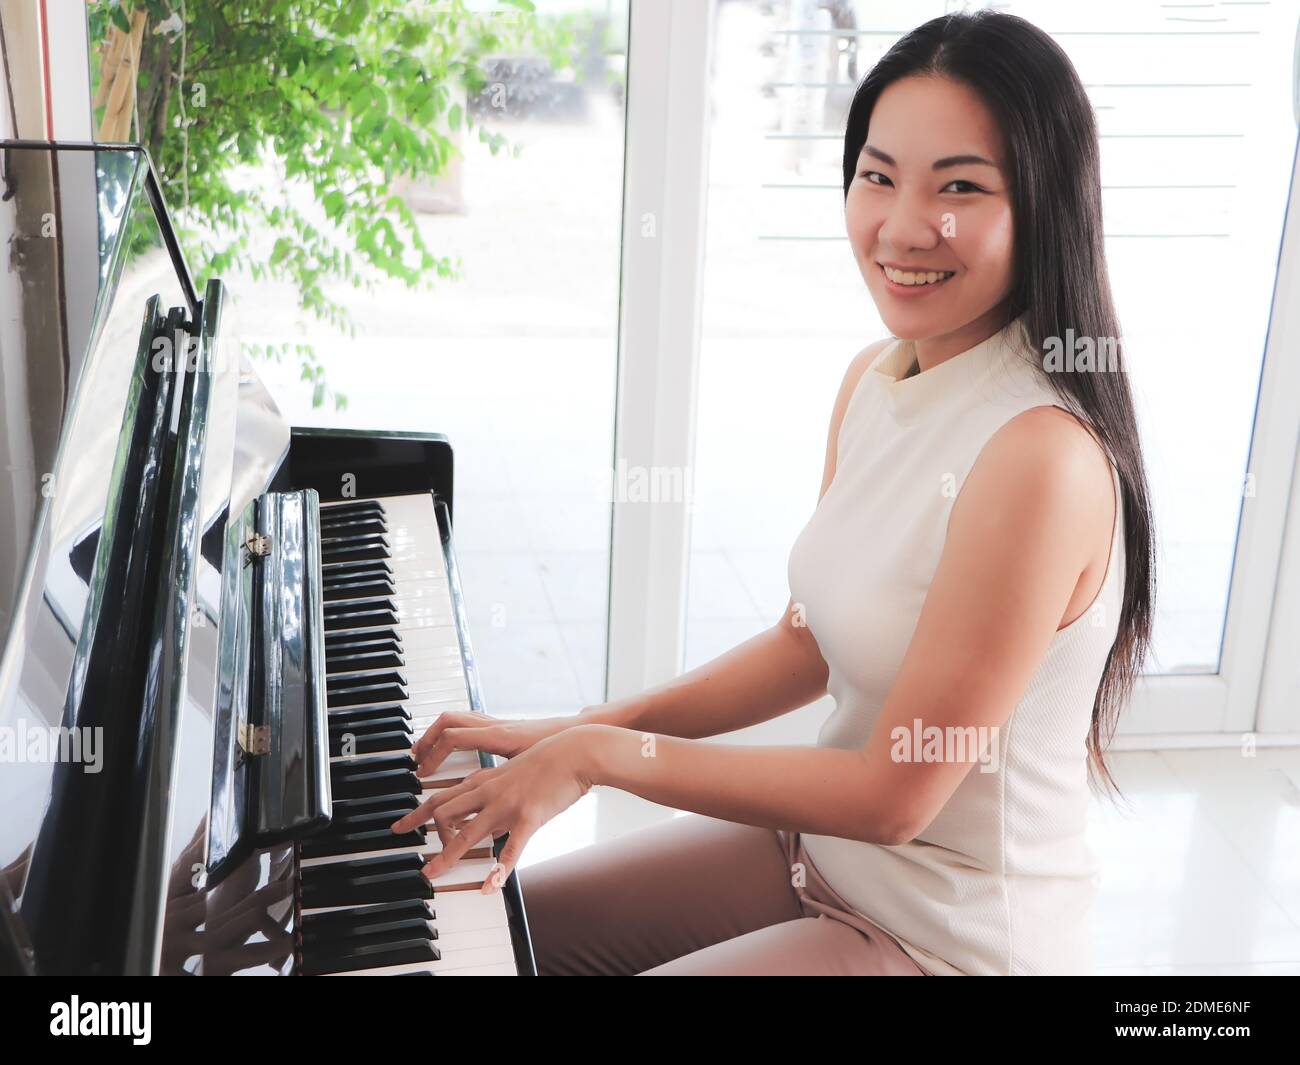 Asian young woman playing piano upright in the white room and smiling at  the camera Stock Photo - Alamy